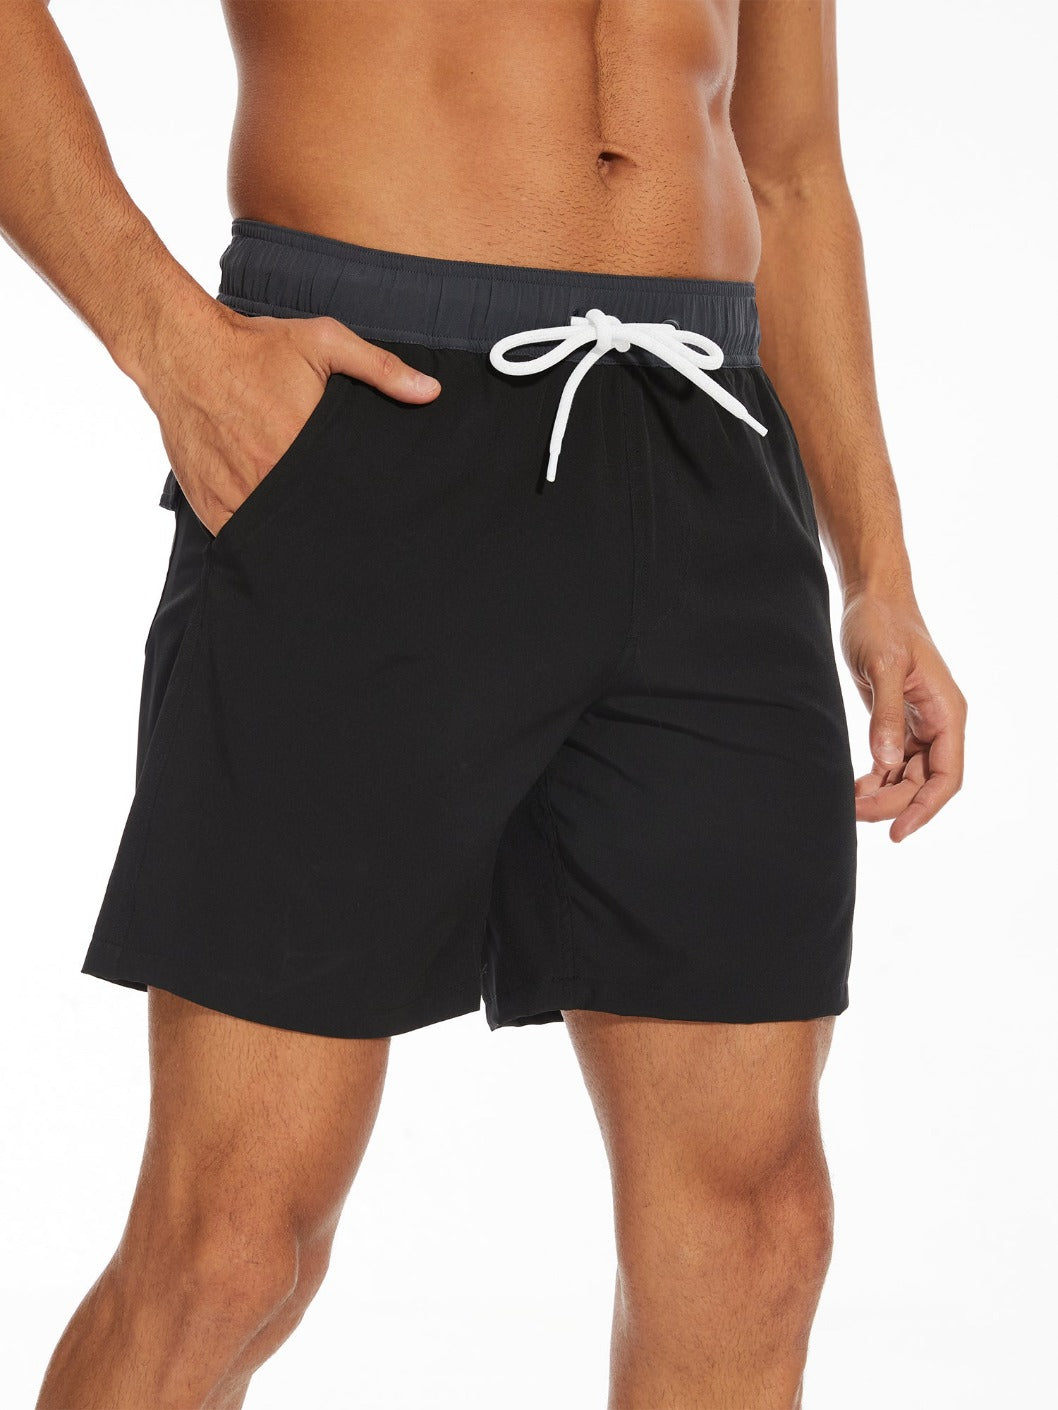 Seaside Swagger Embrace the Waves with These Beach Shorts